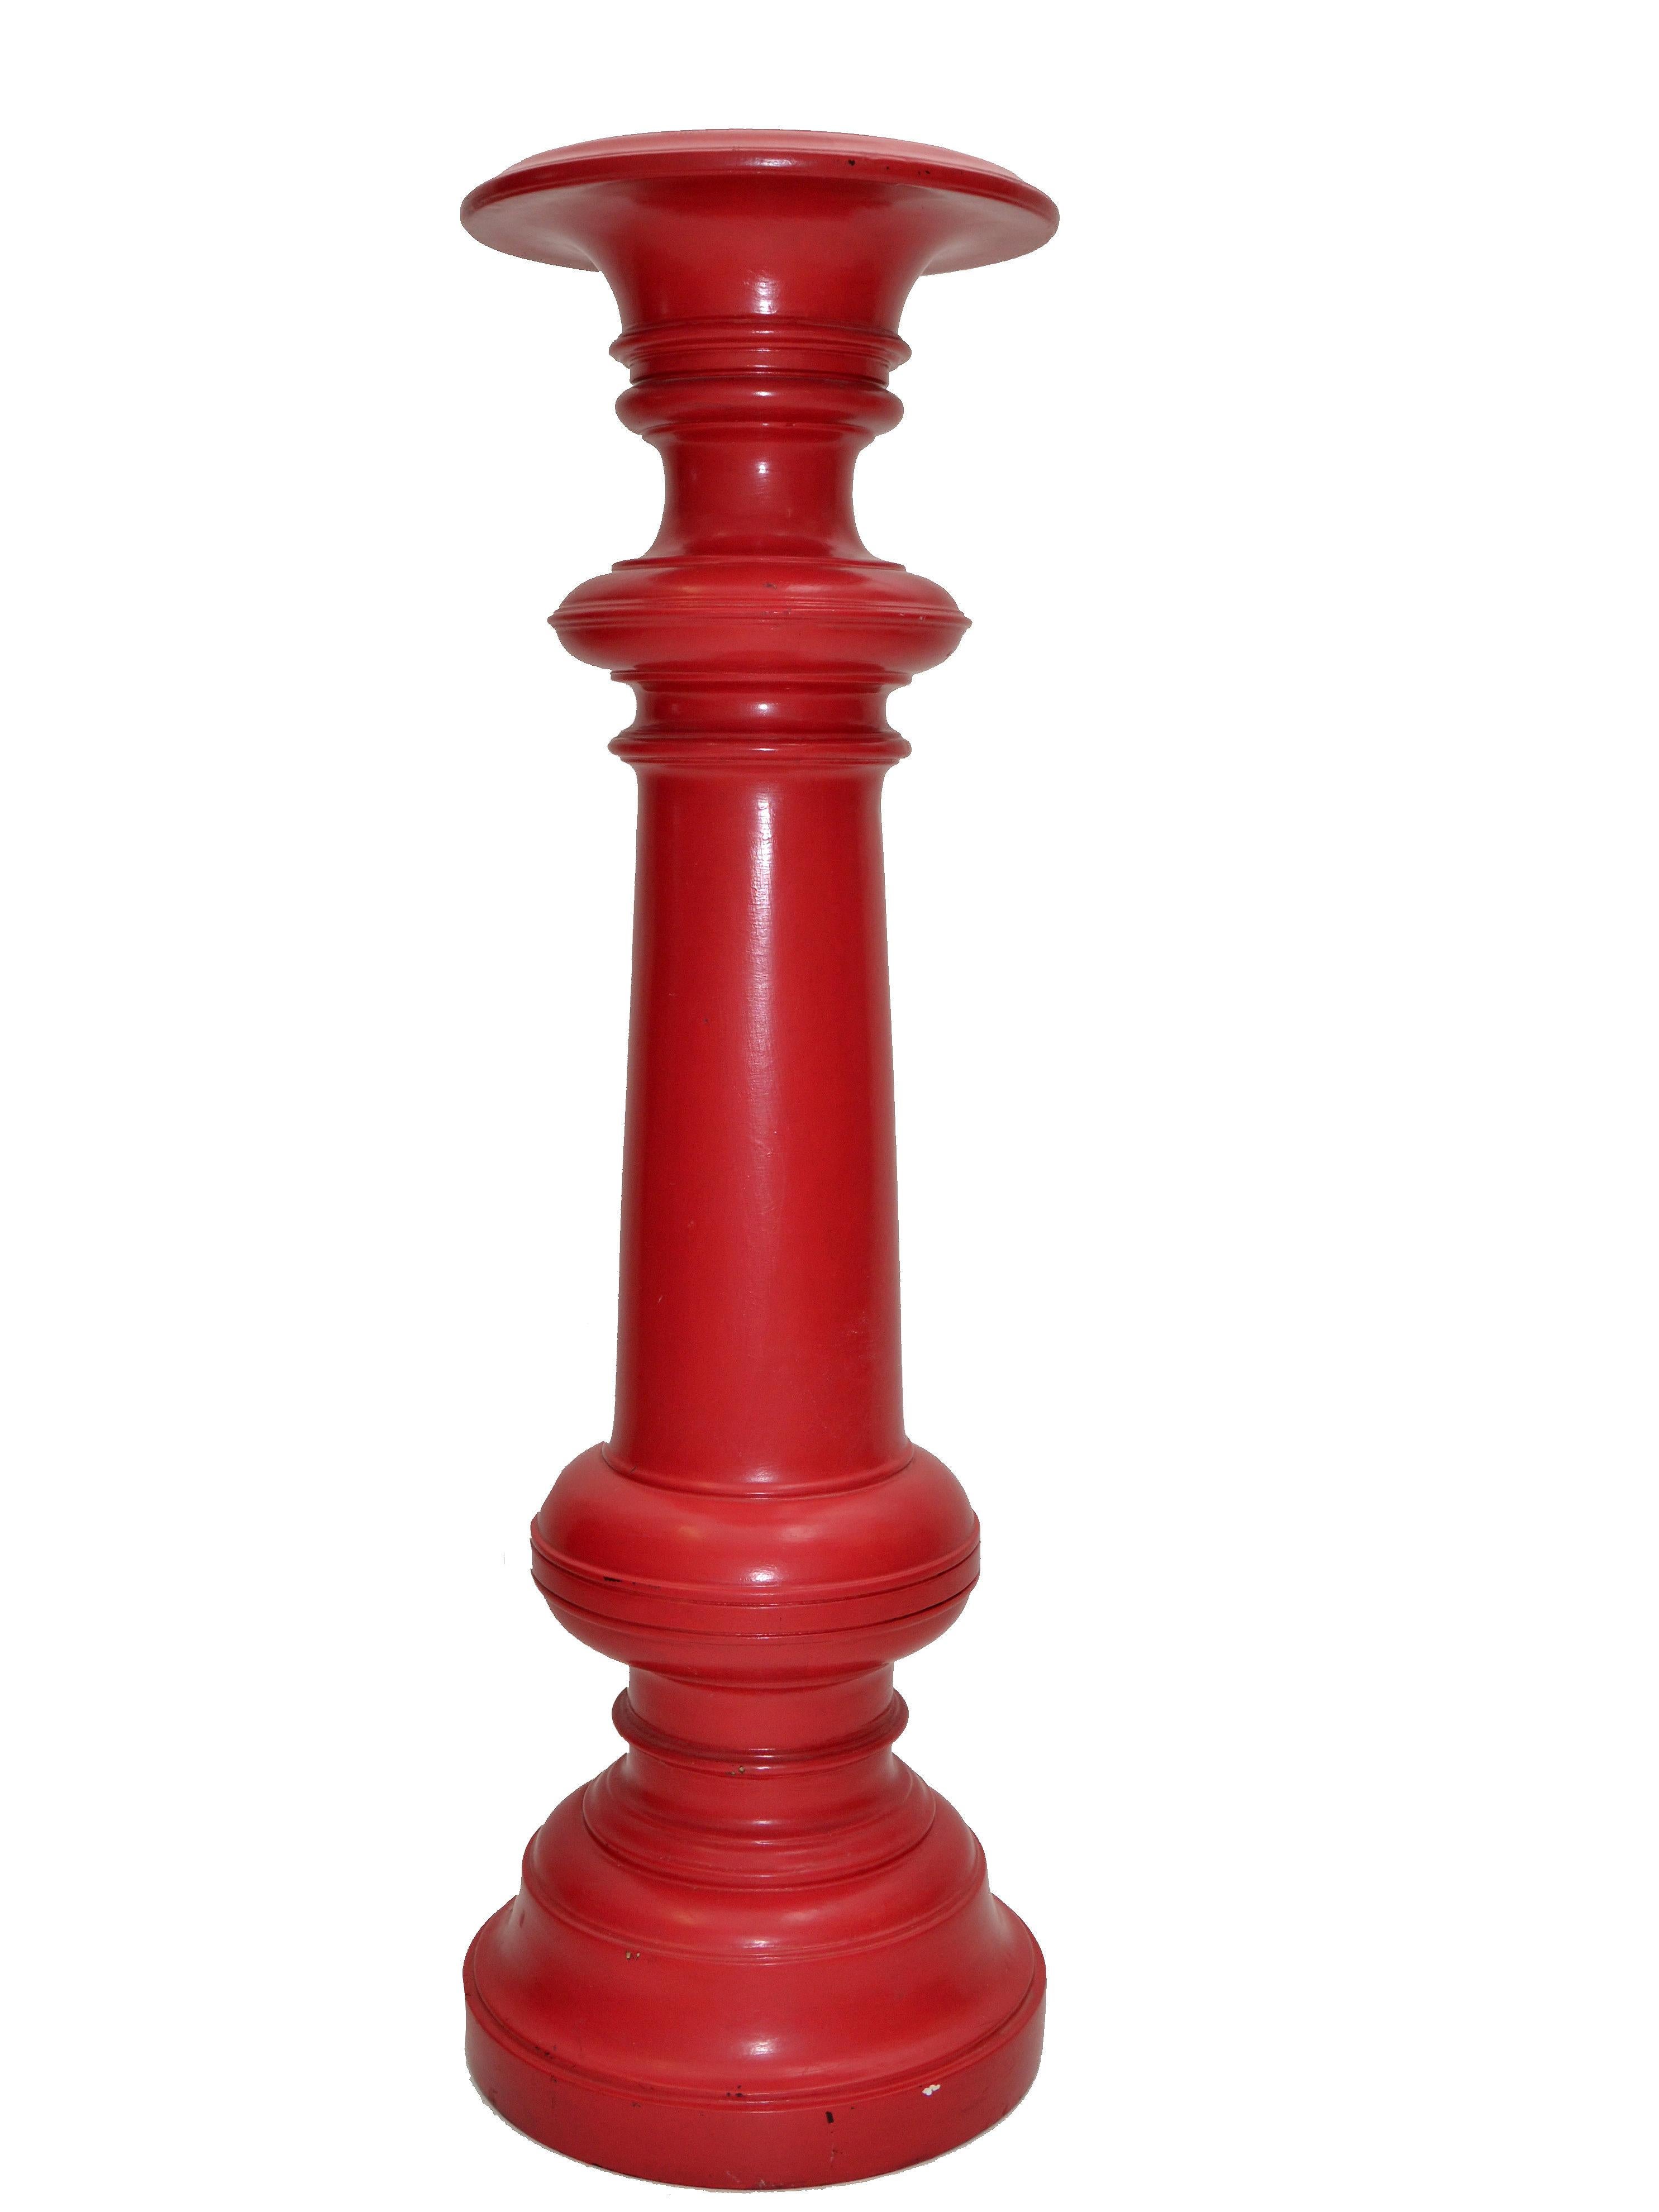 Mid-20th Century Tall Mid-Century Modern Turned Wood Red Finish Plant Stand Sculpture Pedestal For Sale